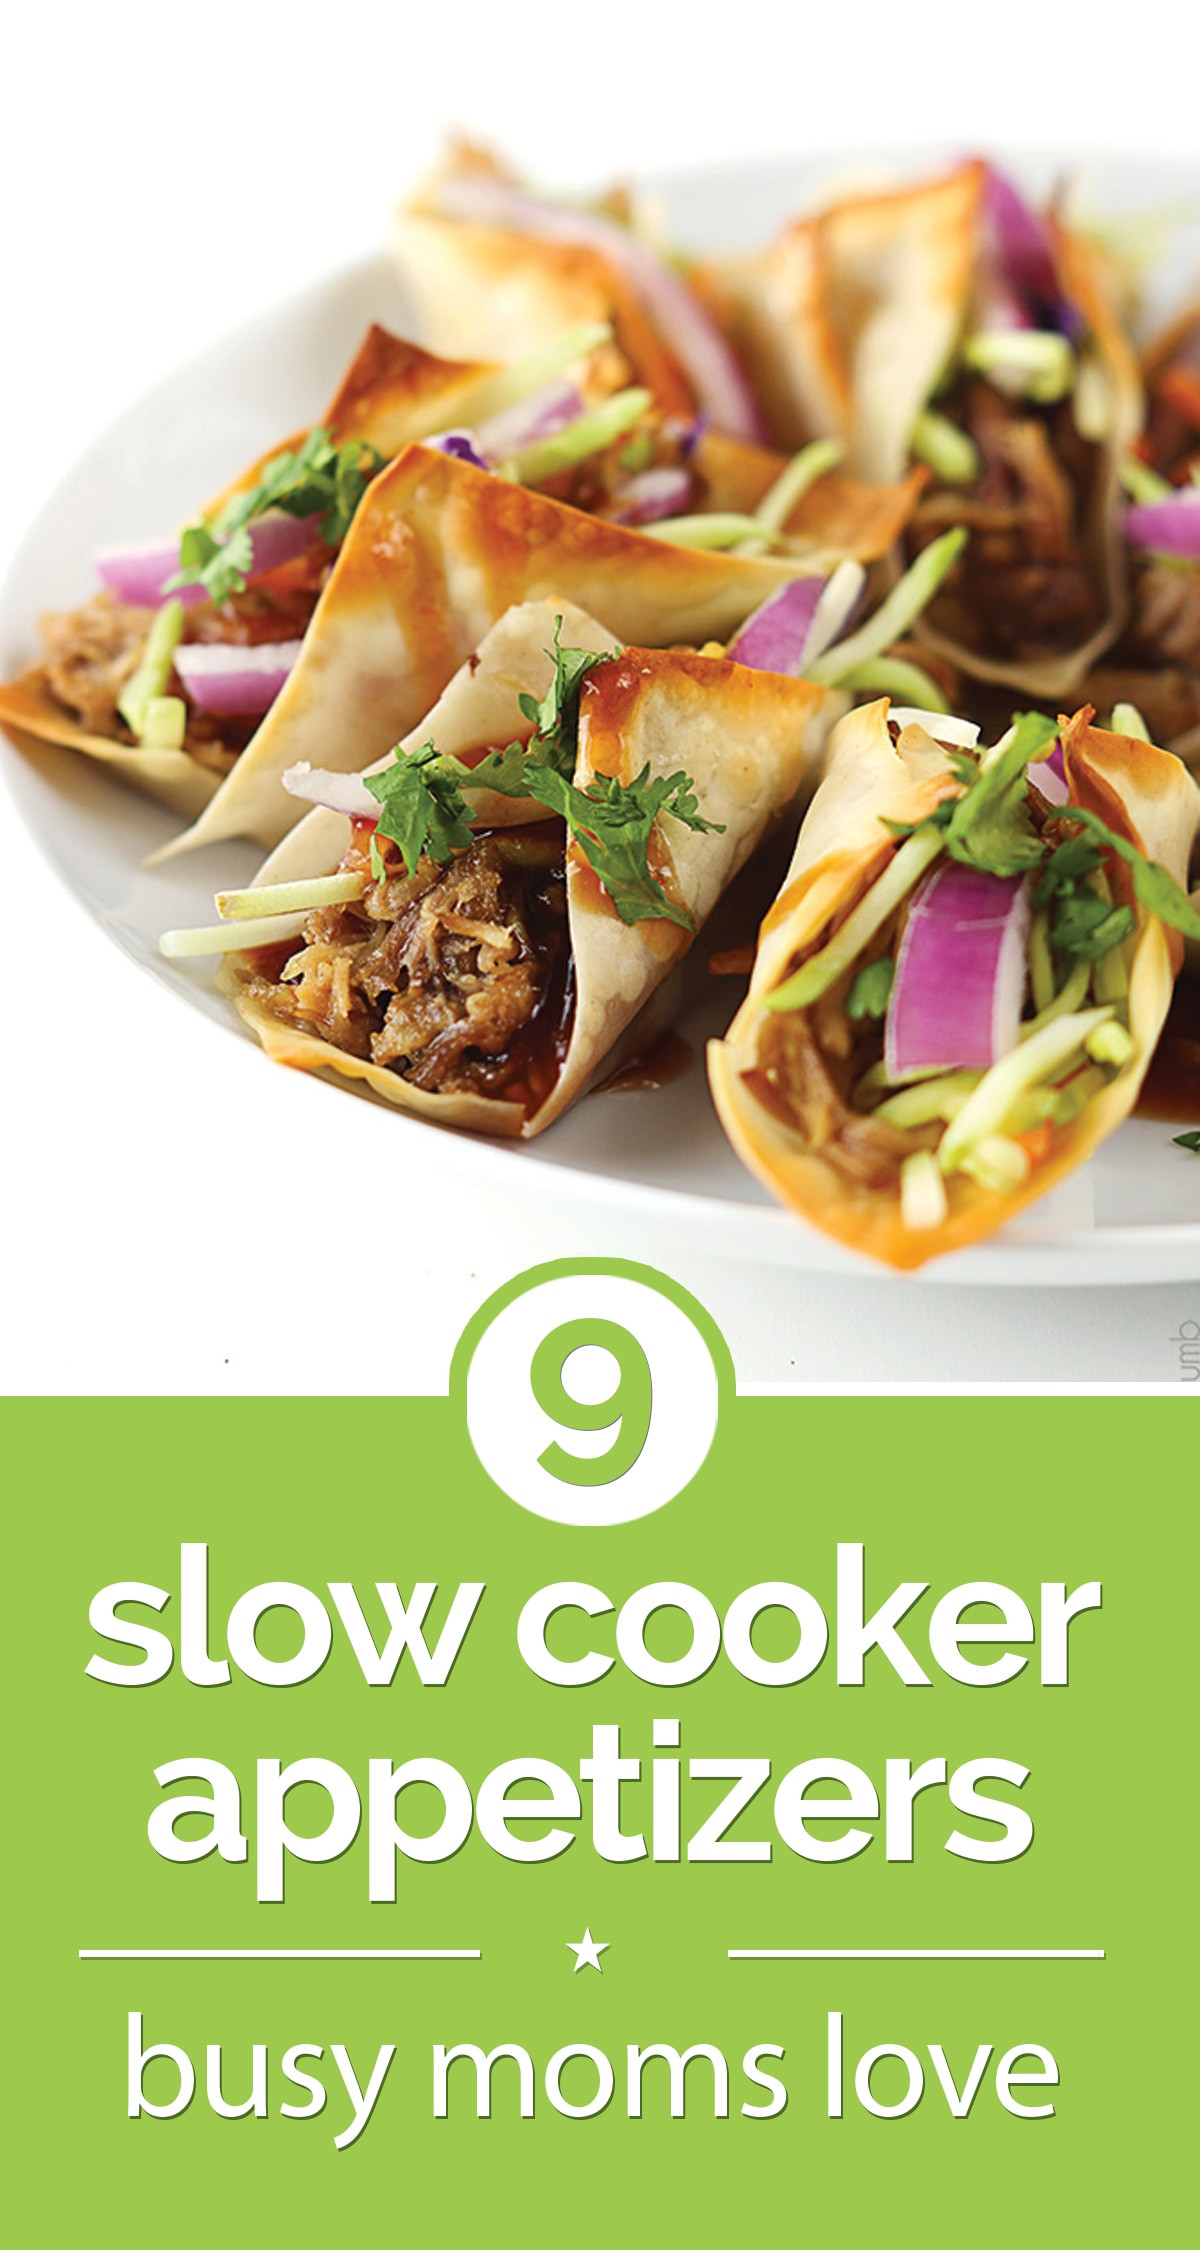 14 Easy Slow Cooker Appetizers
 9 Slow Cooker Appetizers Busy Moms Love thegoodstuff